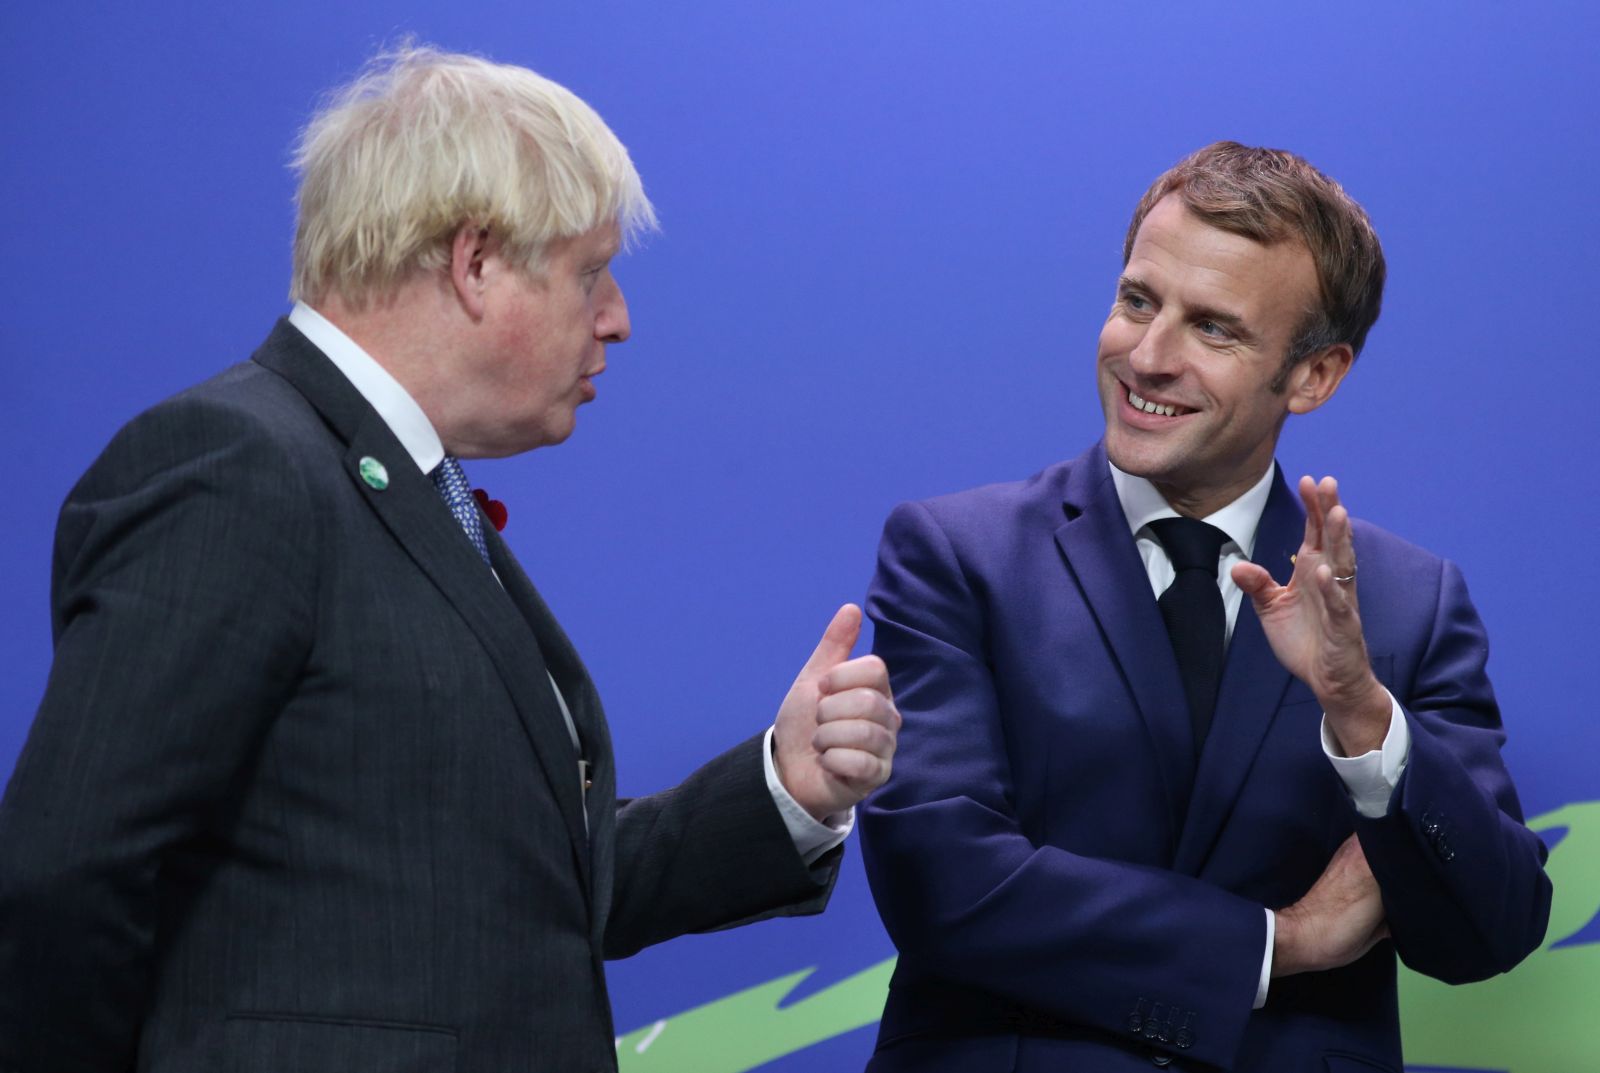 epa09557892 British Prime Minister Boris Johnson (L) greets French President Emmanuel Macron as leaders arrive for the COP26 UN Climate Summit in Glasgow, Britain 01 November 2021. The COP26 climate change conference runs from 31 October to 12 November 2021 in Glasgow.  EPA/ROBERT PERRY